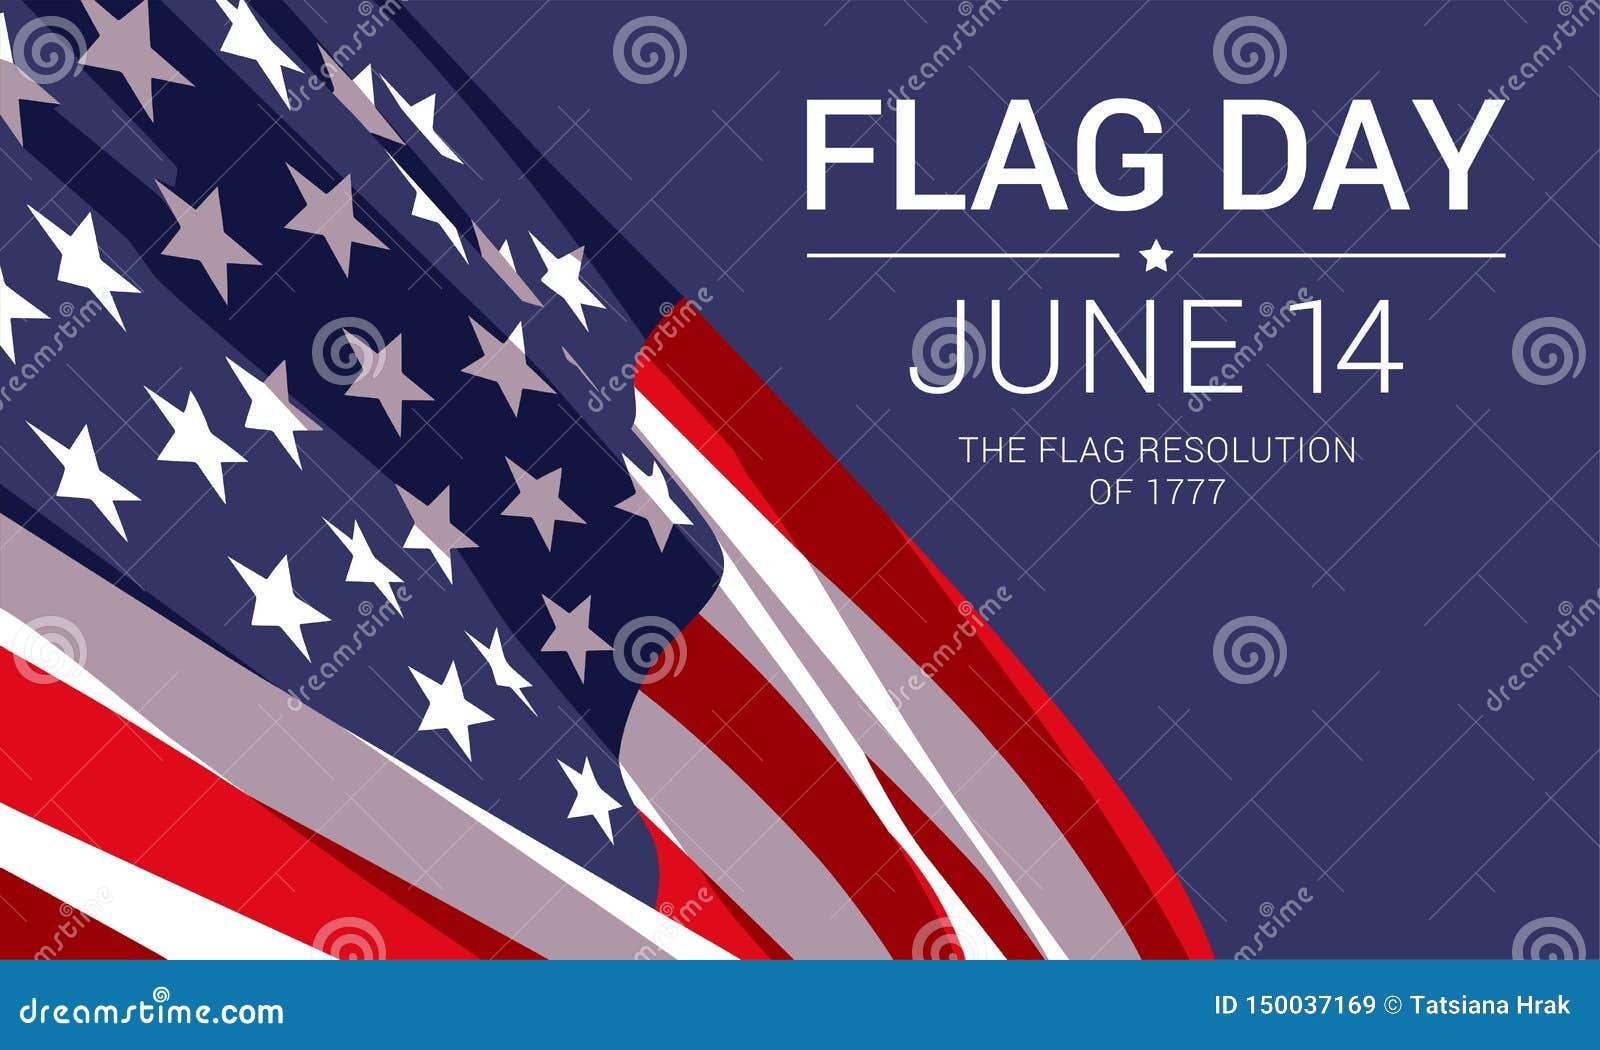 14th June Flag Day in the United States of America. Stock Vector